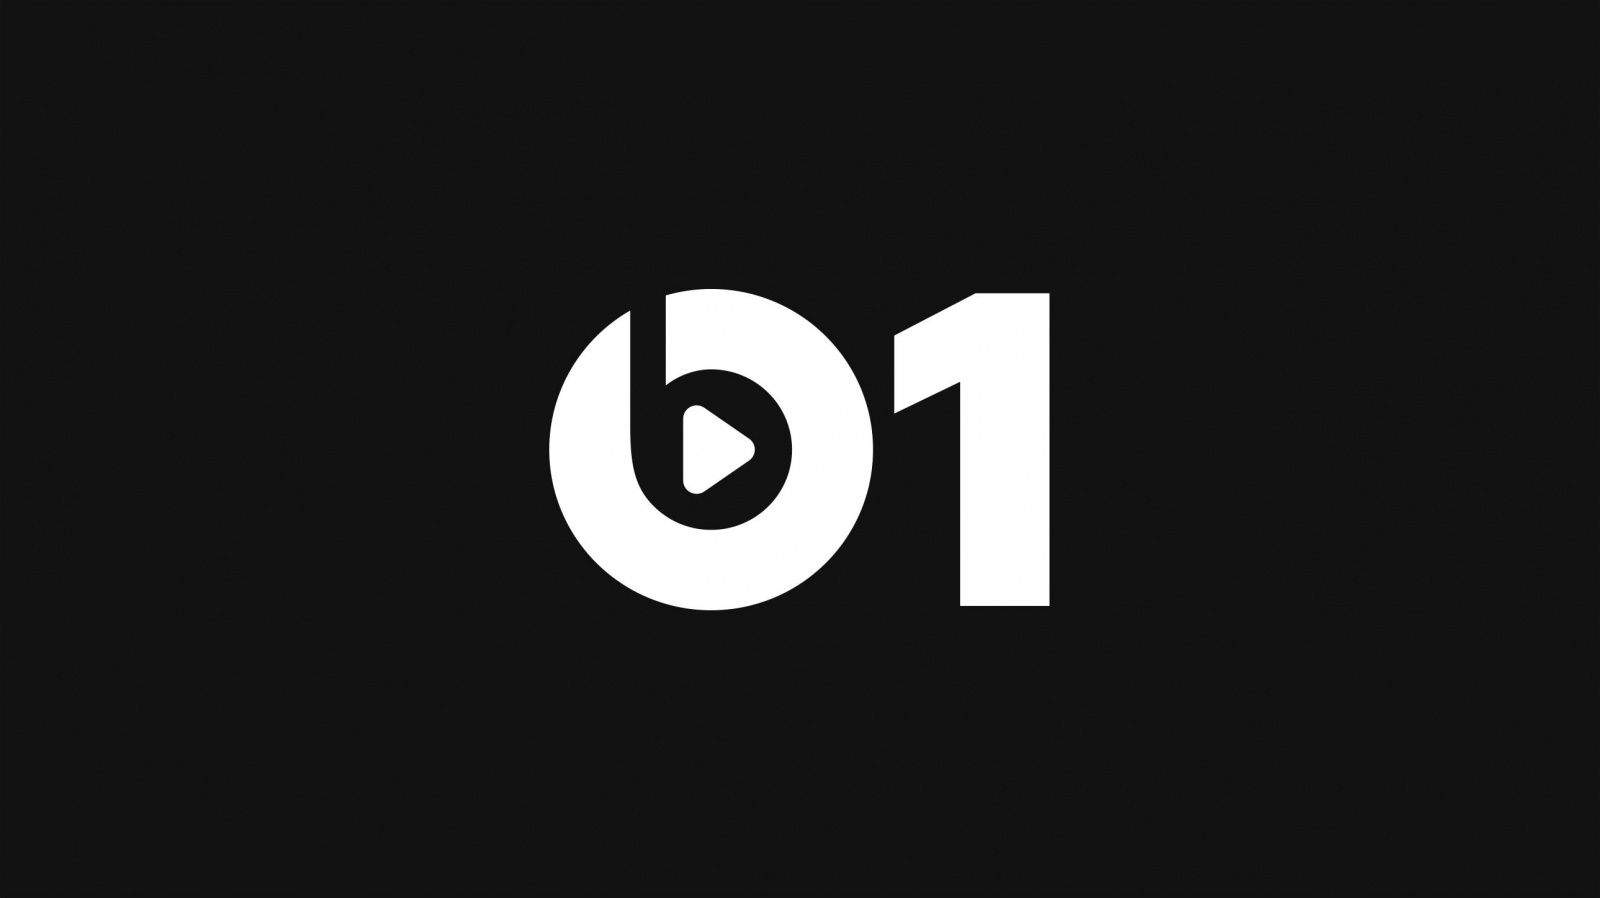 If you're looking to catch up with Beats 1, here's how you do it.